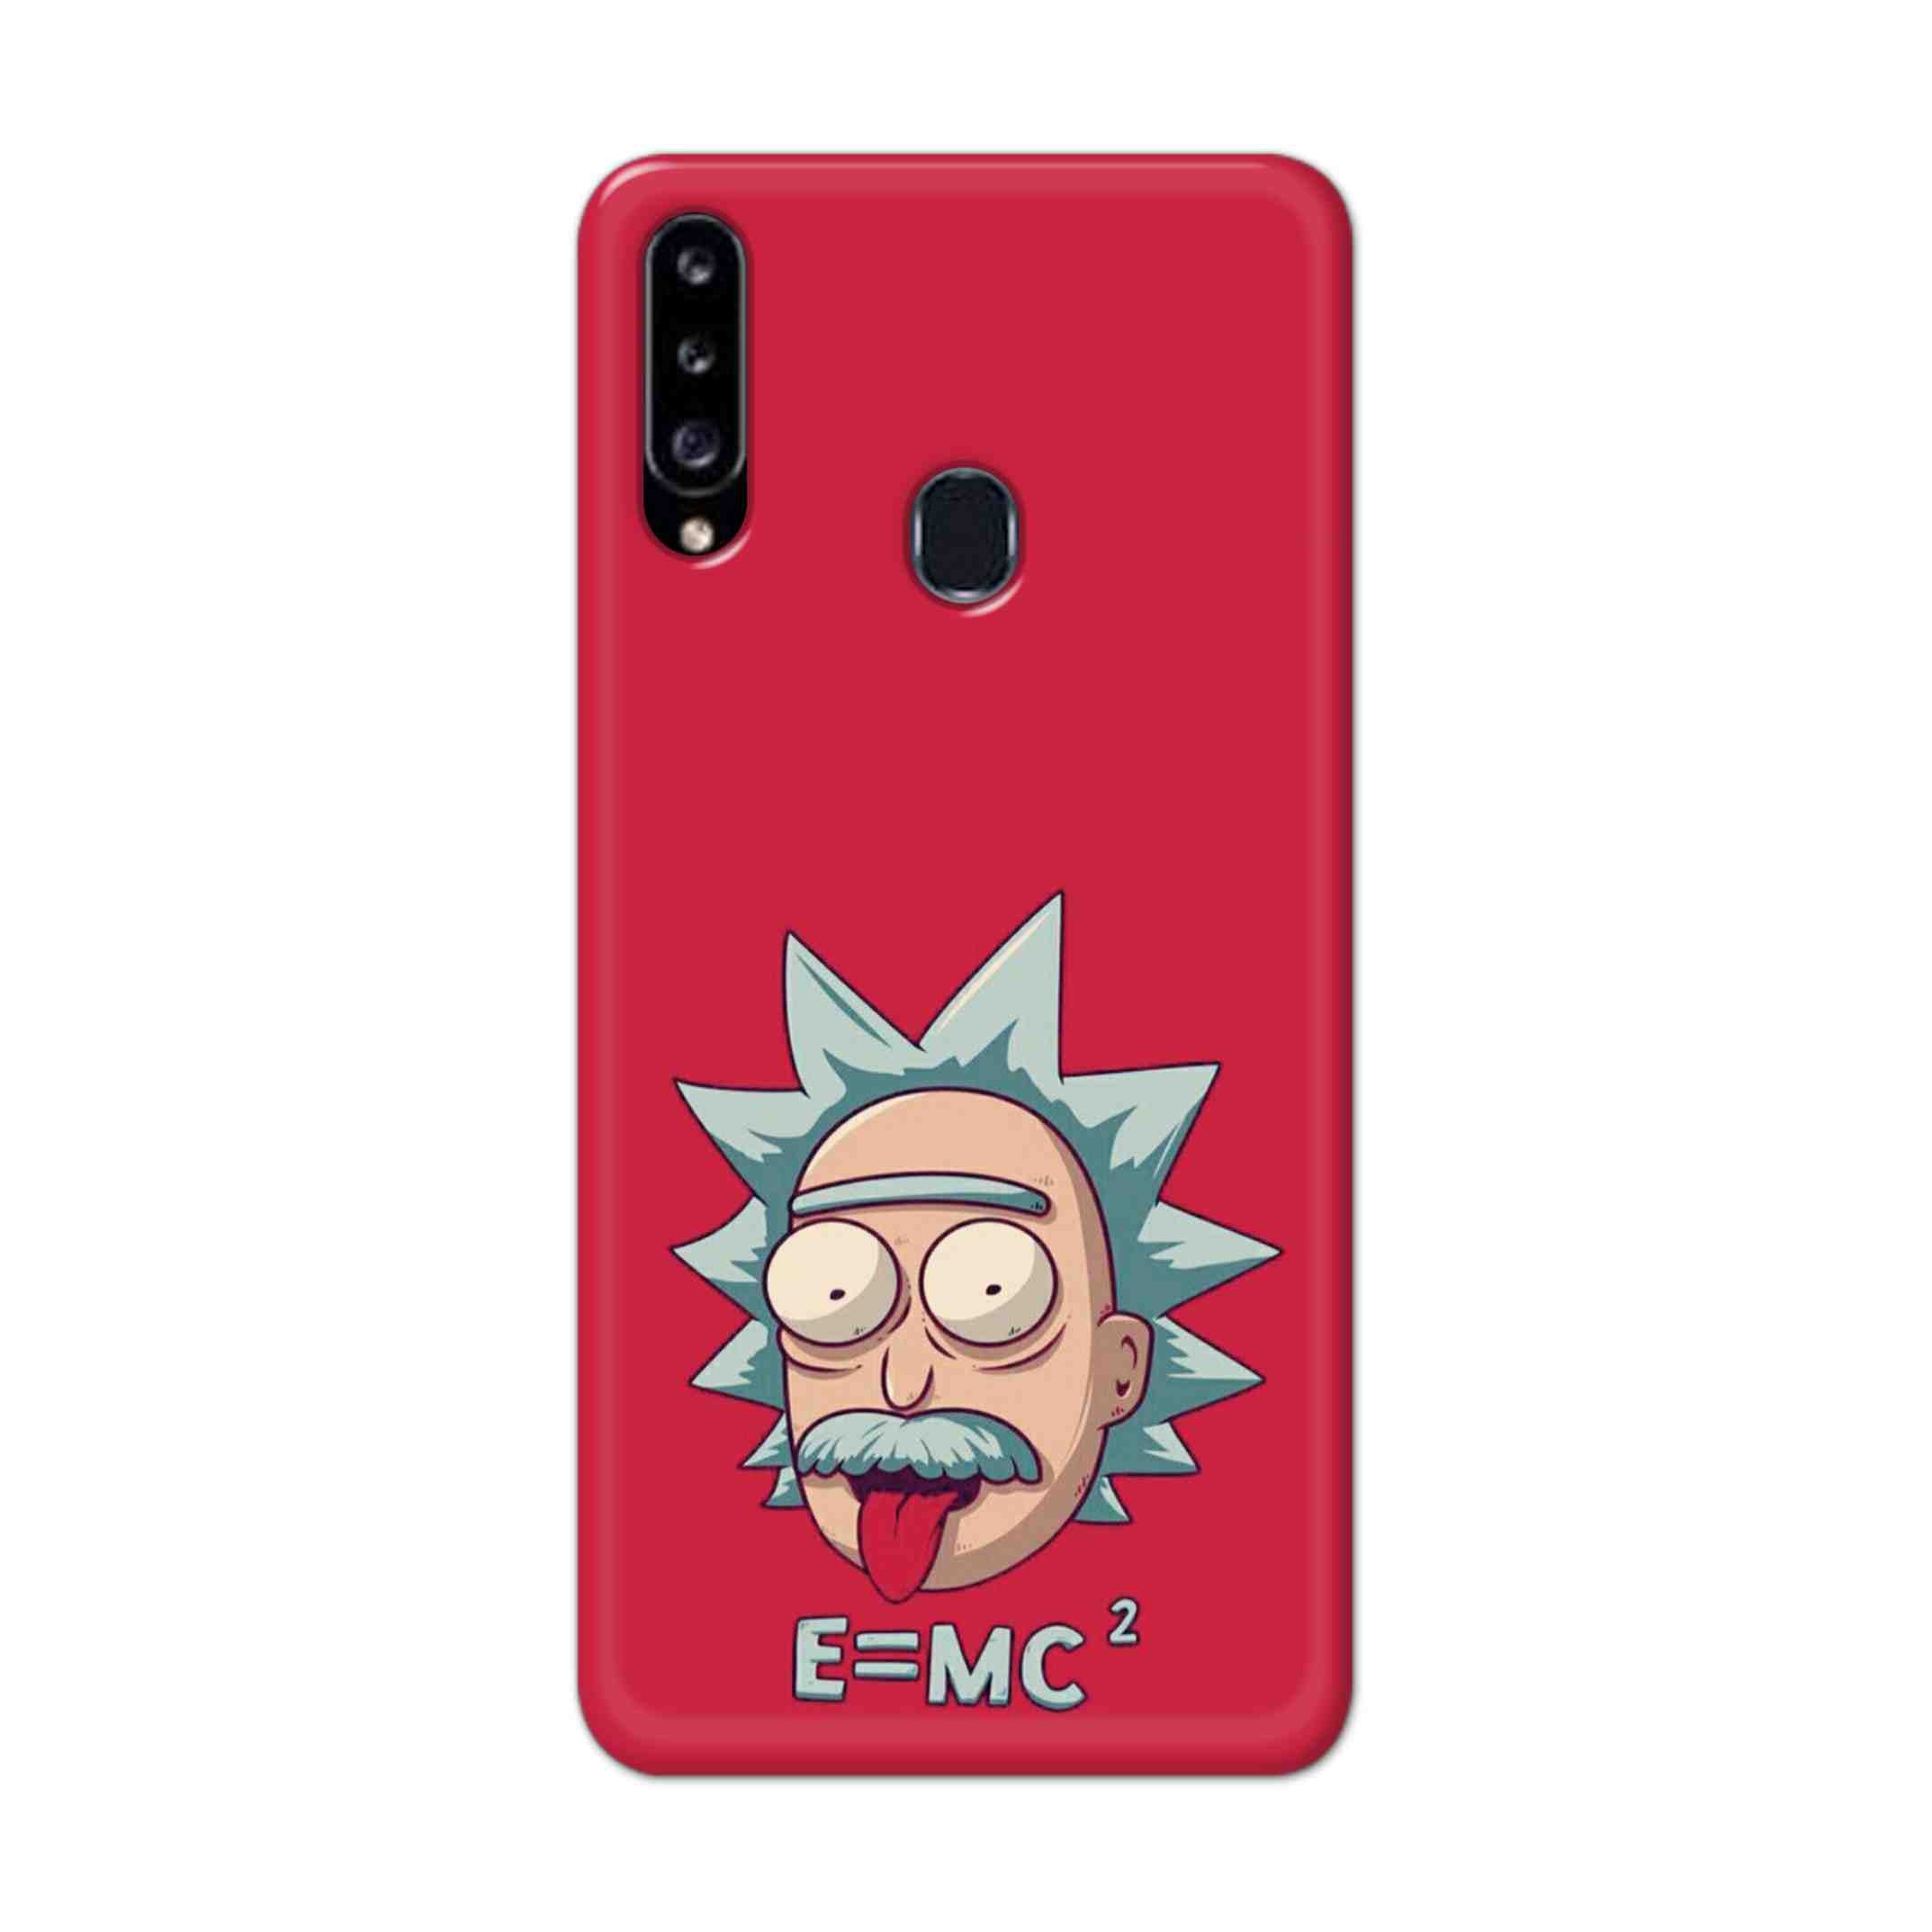 Buy E=Mc Hard Back Mobile Phone Case Cover For Samsung Galaxy A21 Online